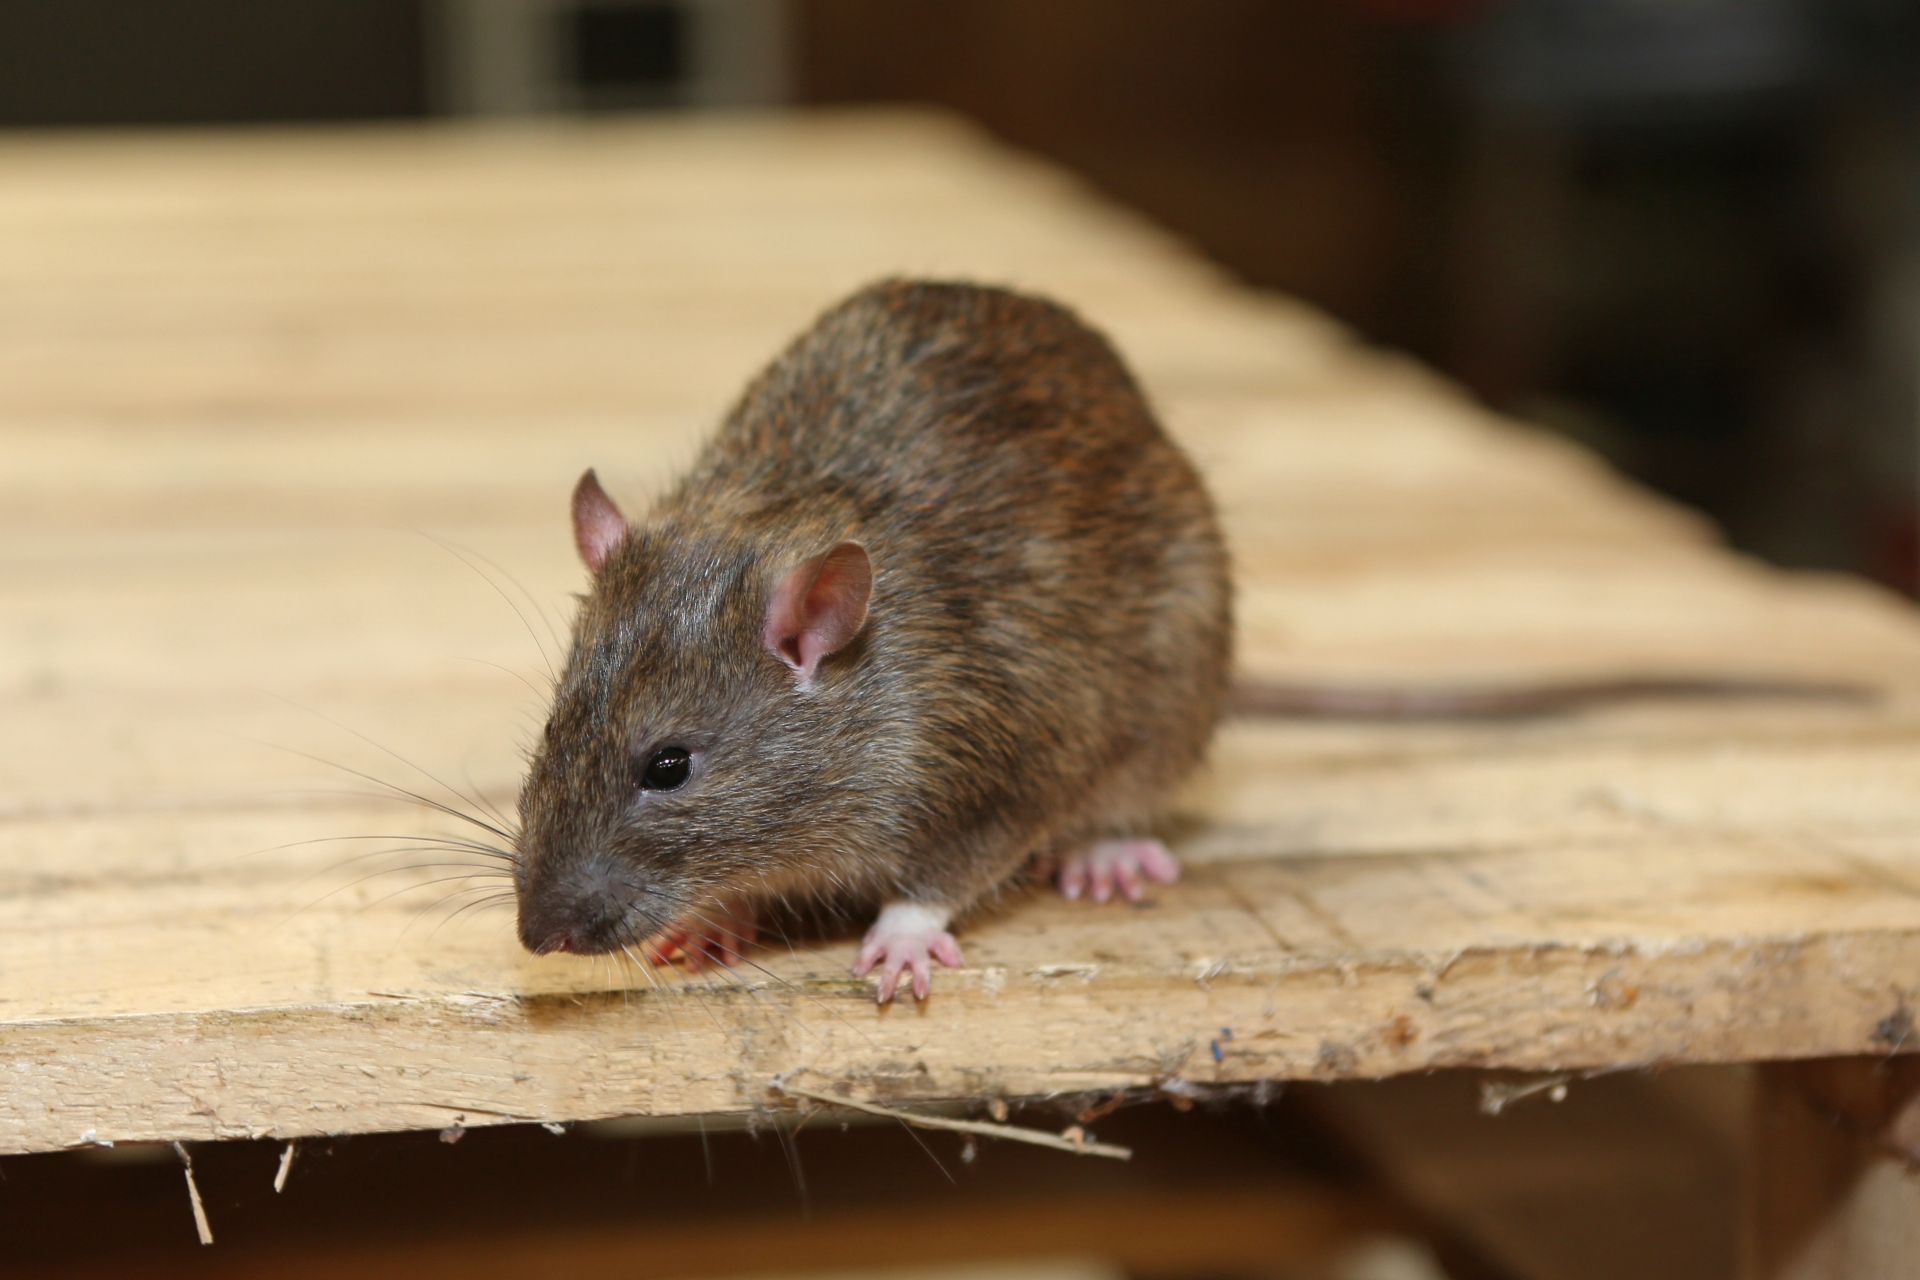 Rat extermination, Pest Control in Ilford, Loxford, IG1. Call Now 020 8166 9746